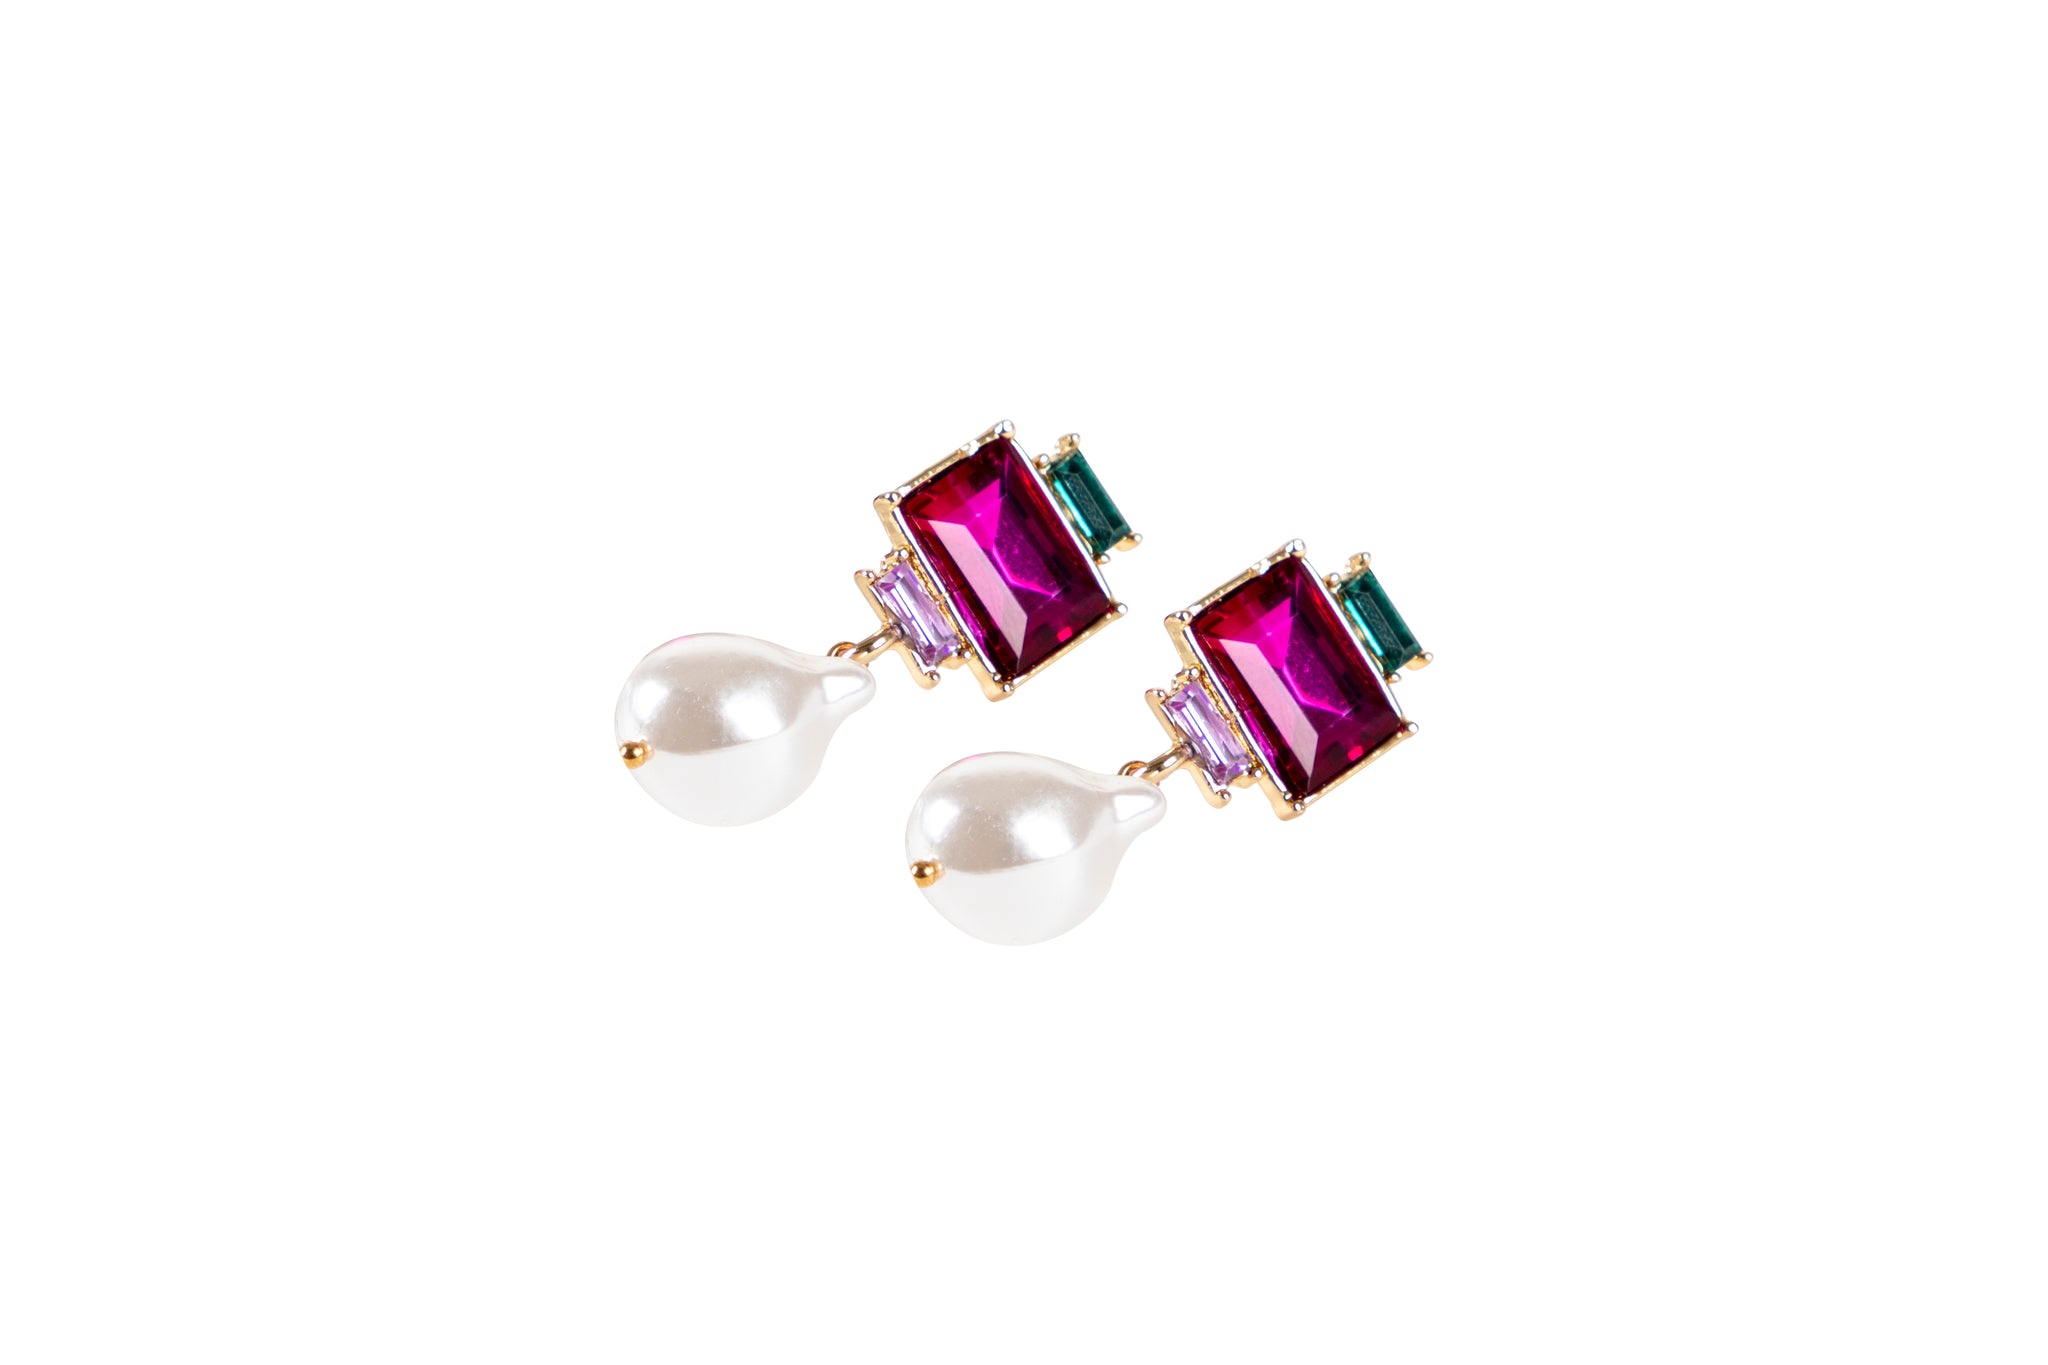 Fuschia & Green Crystals with a Pearl Drop. Gold tone.